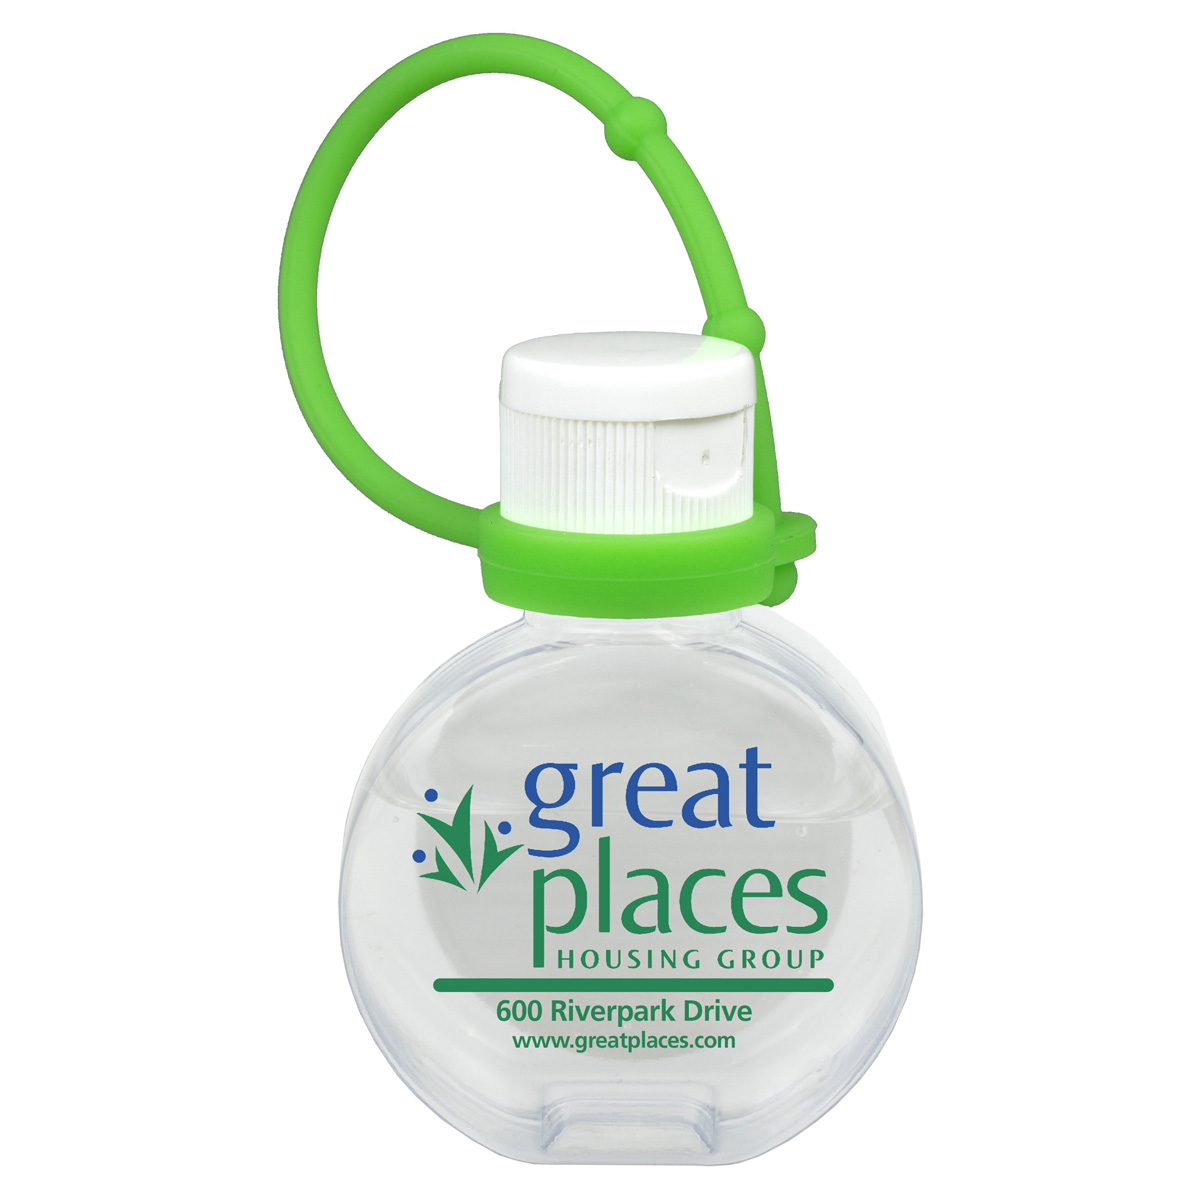 Compact Hand Sanitizer